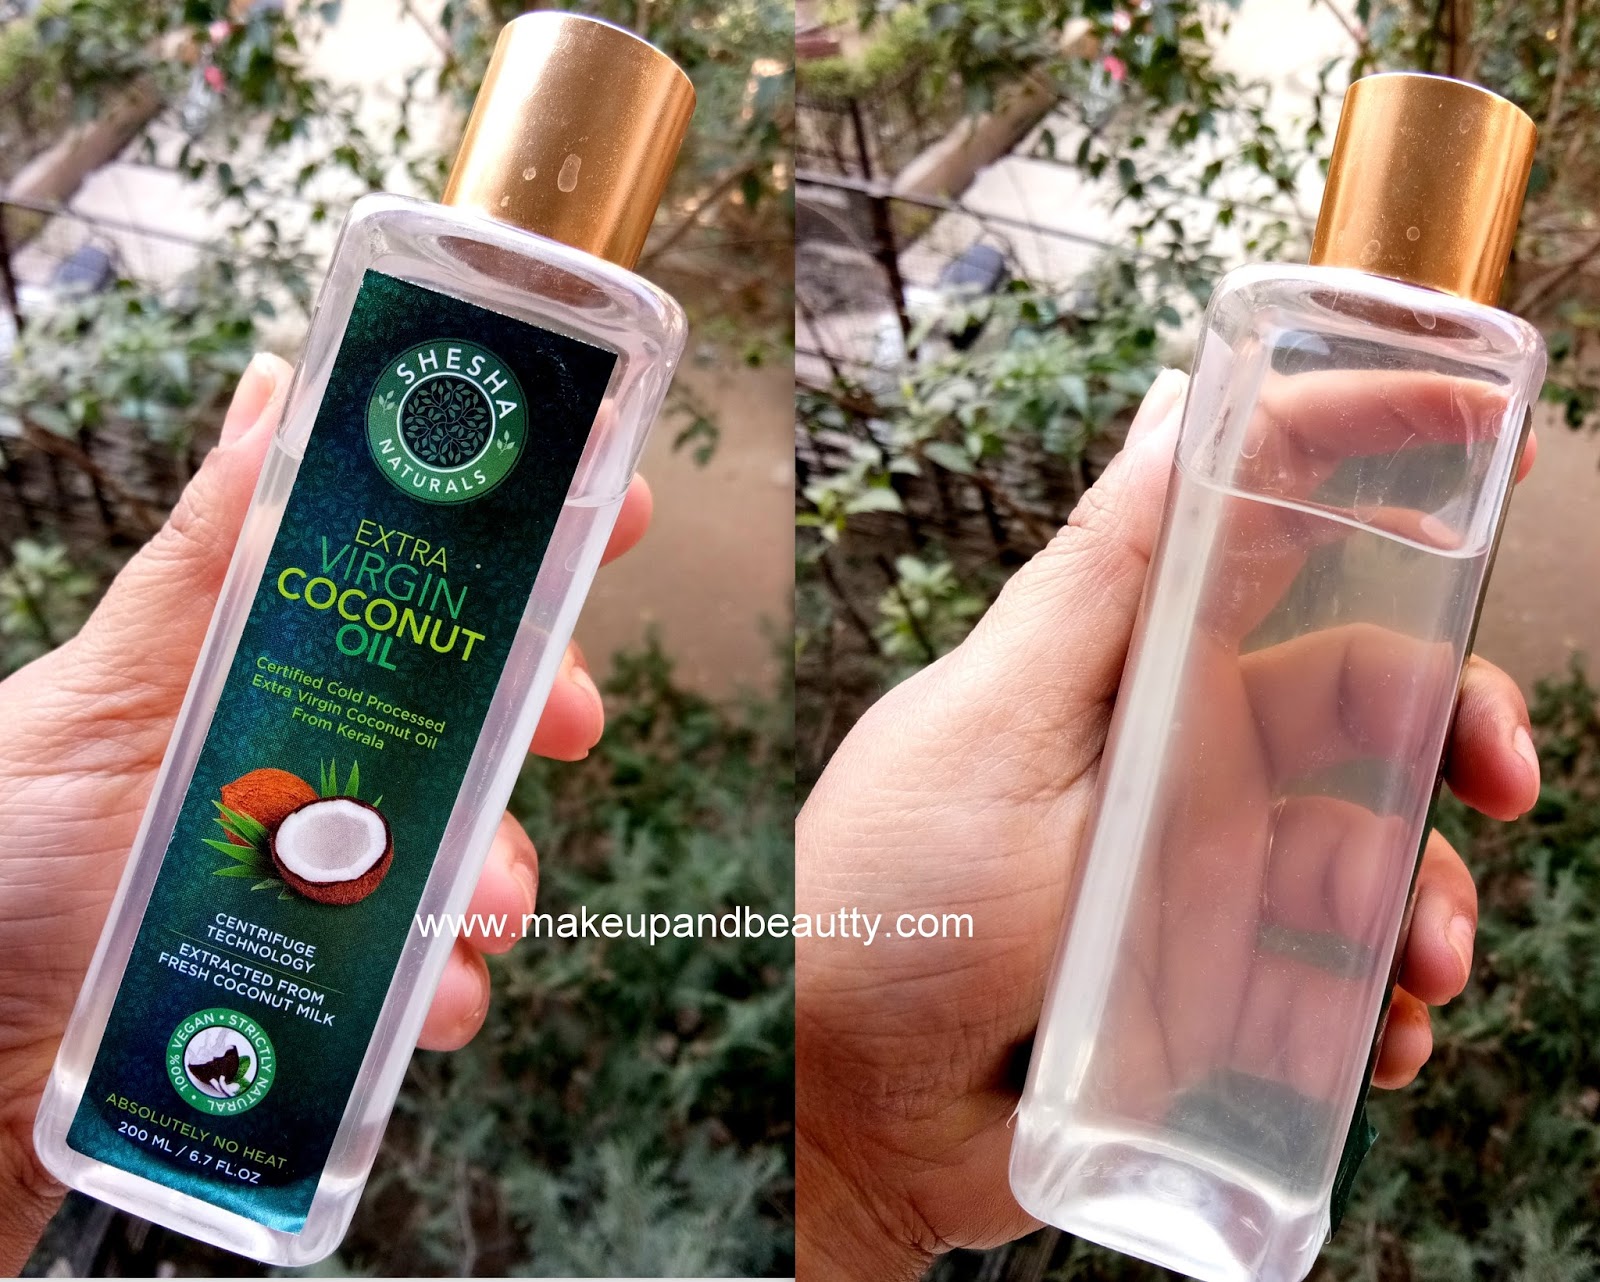 Makeup and beauty !!!: REVIEW OF SHESHA NATURALS COLD PROCESSED EXTRA  VIRGIN COCONUT OIL:-